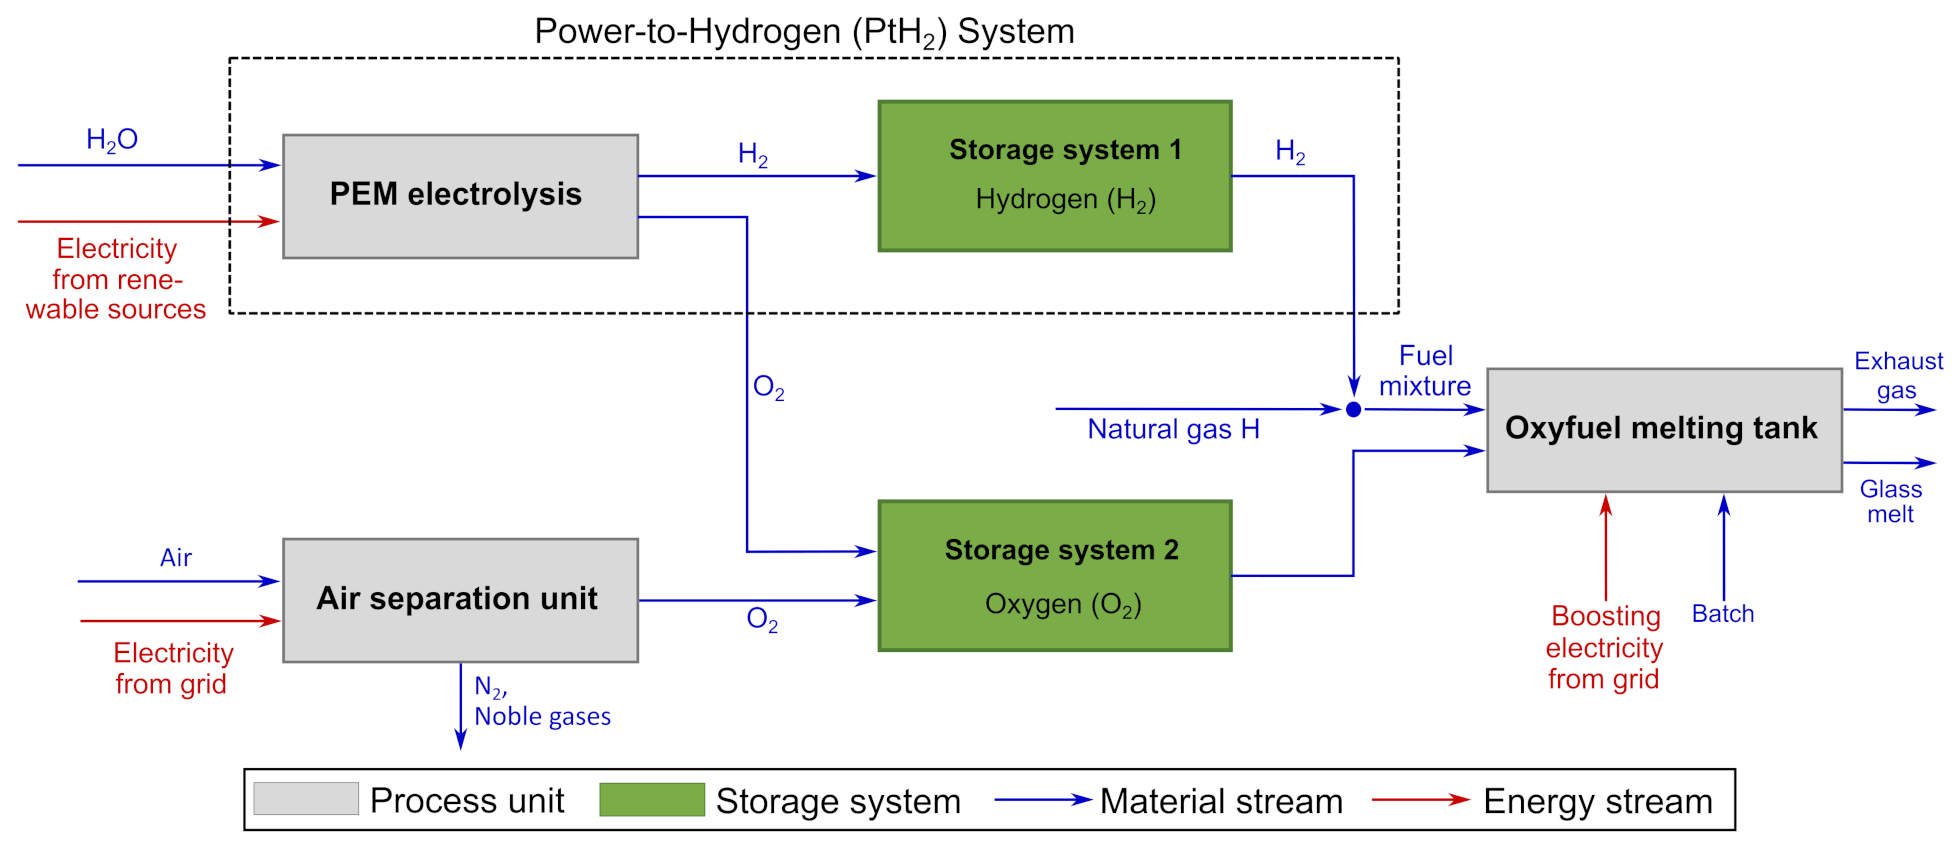 Energies | Free Full-Text | Simulation and Techno-Economic Analysis of a  Power-to-Hydrogen Process for Oxyfuel Glass Melting